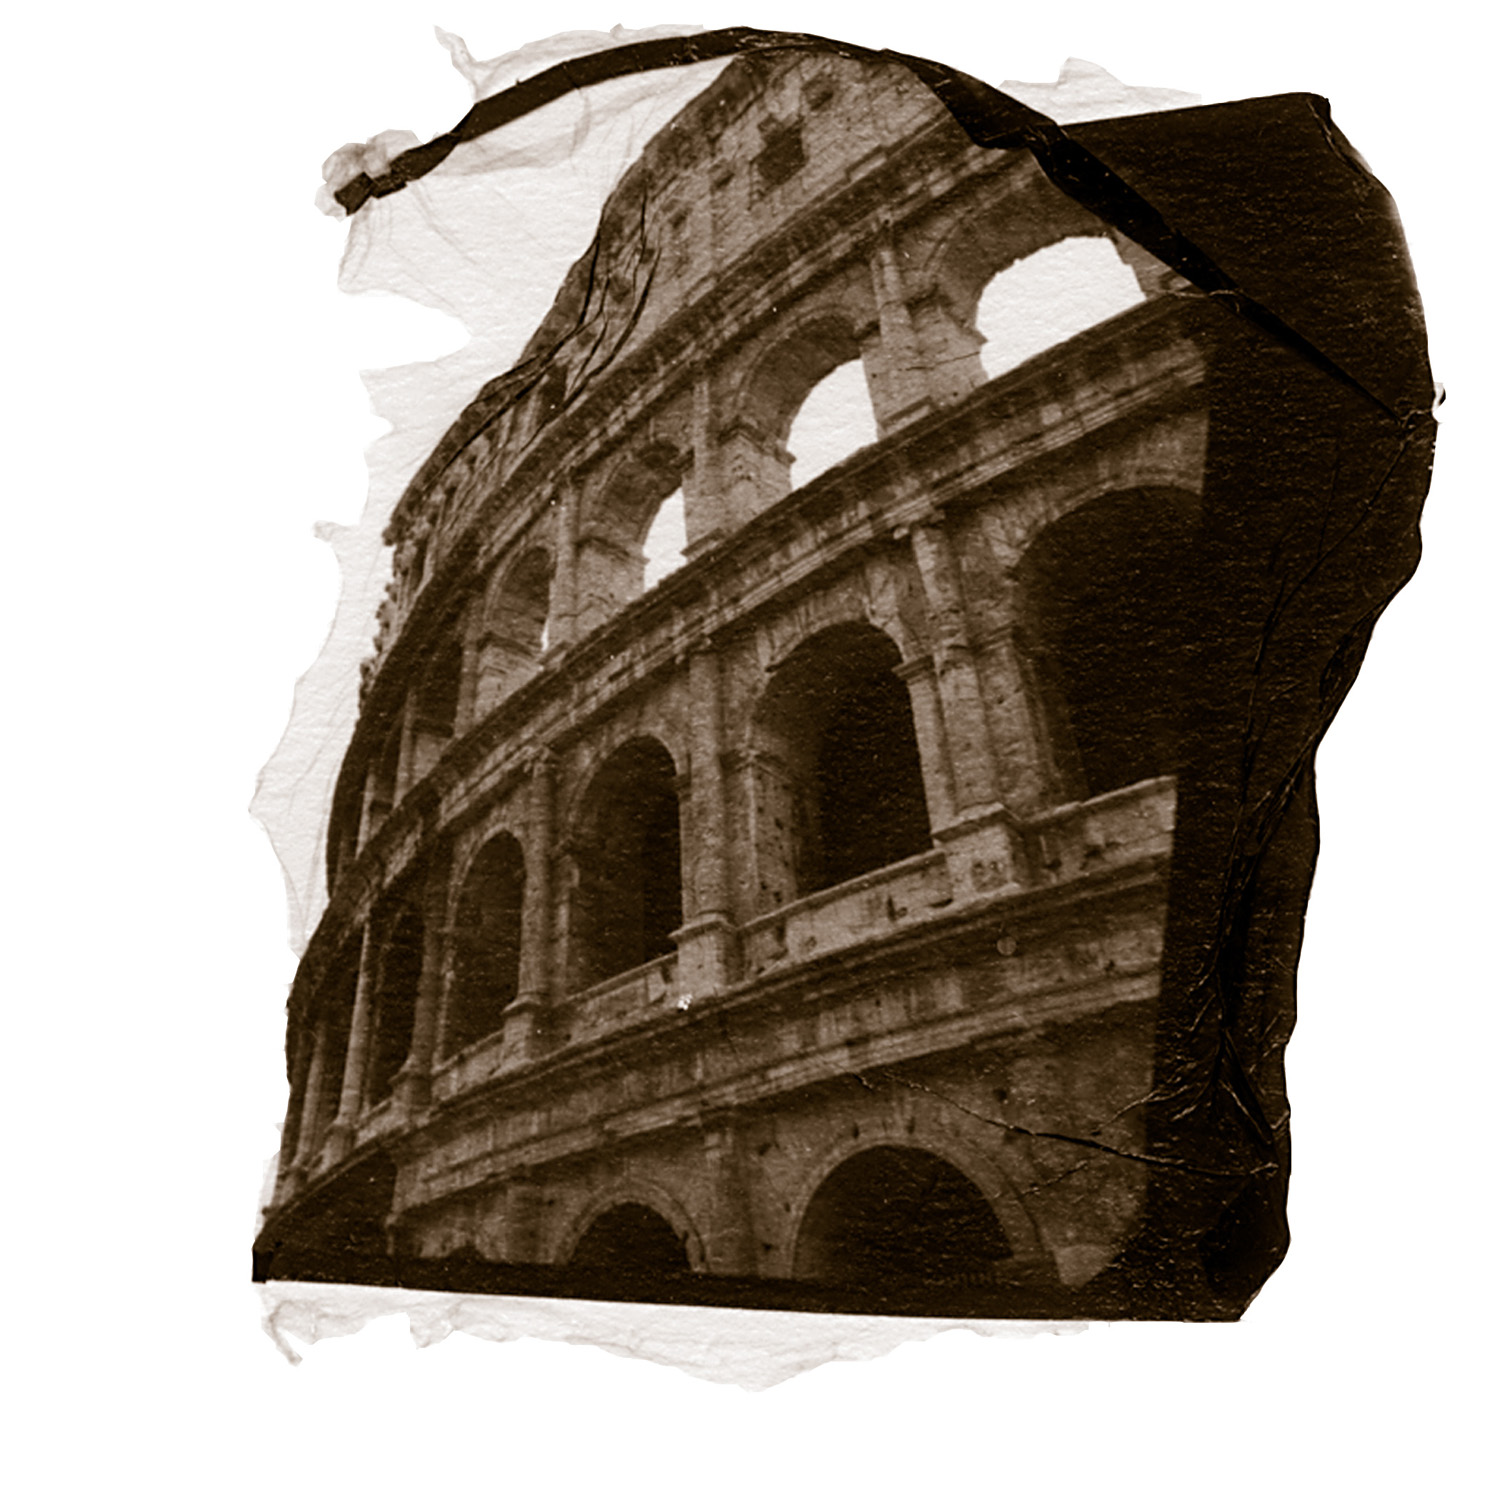 Coloseo for book.jpg